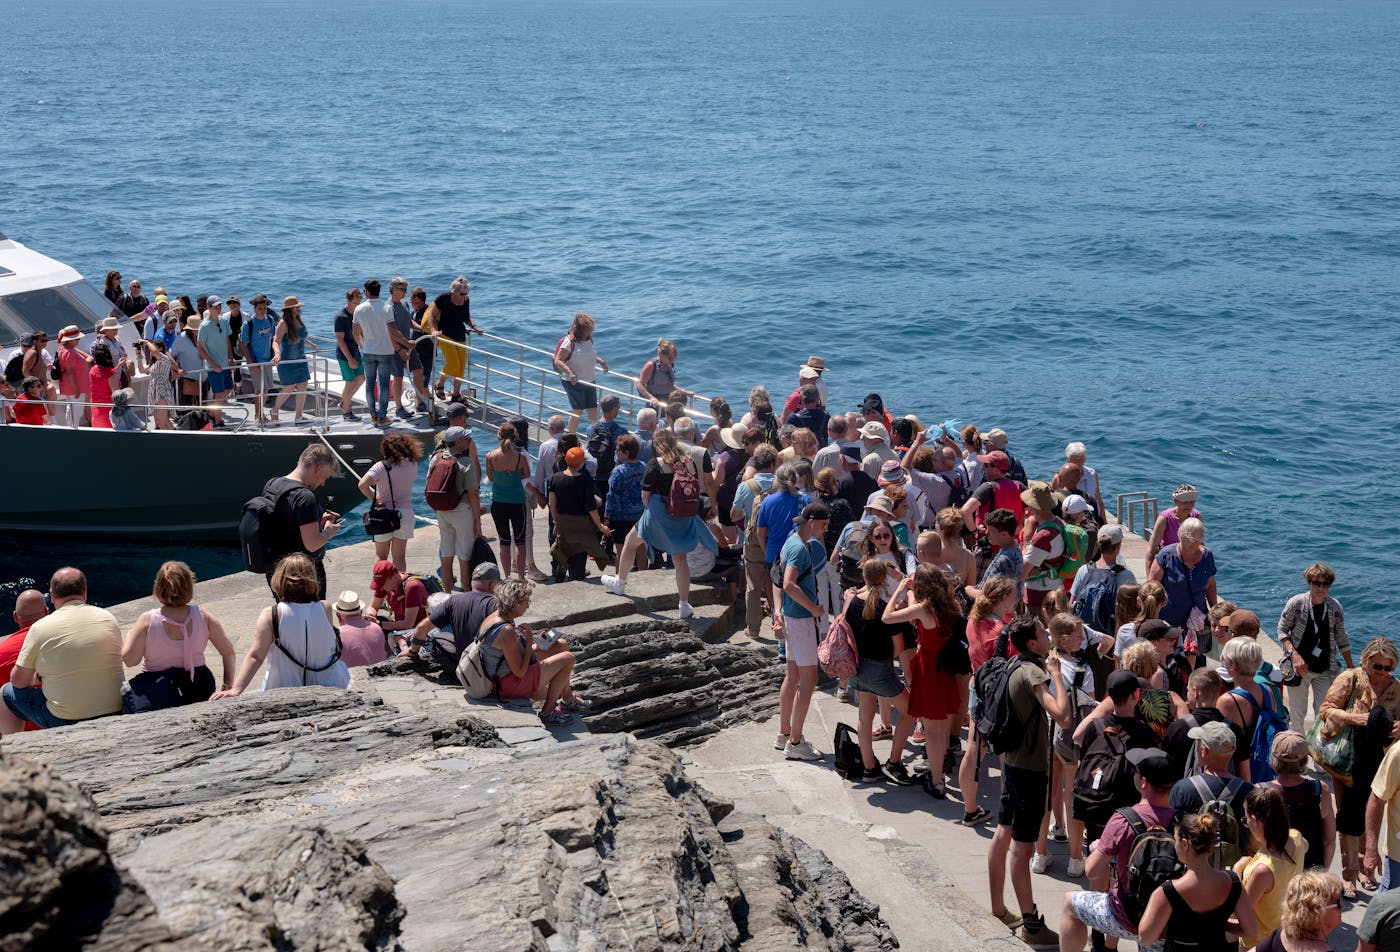 Tourists stream into Cinque Terre via train or from cruise ships docked at a nearby terminal.